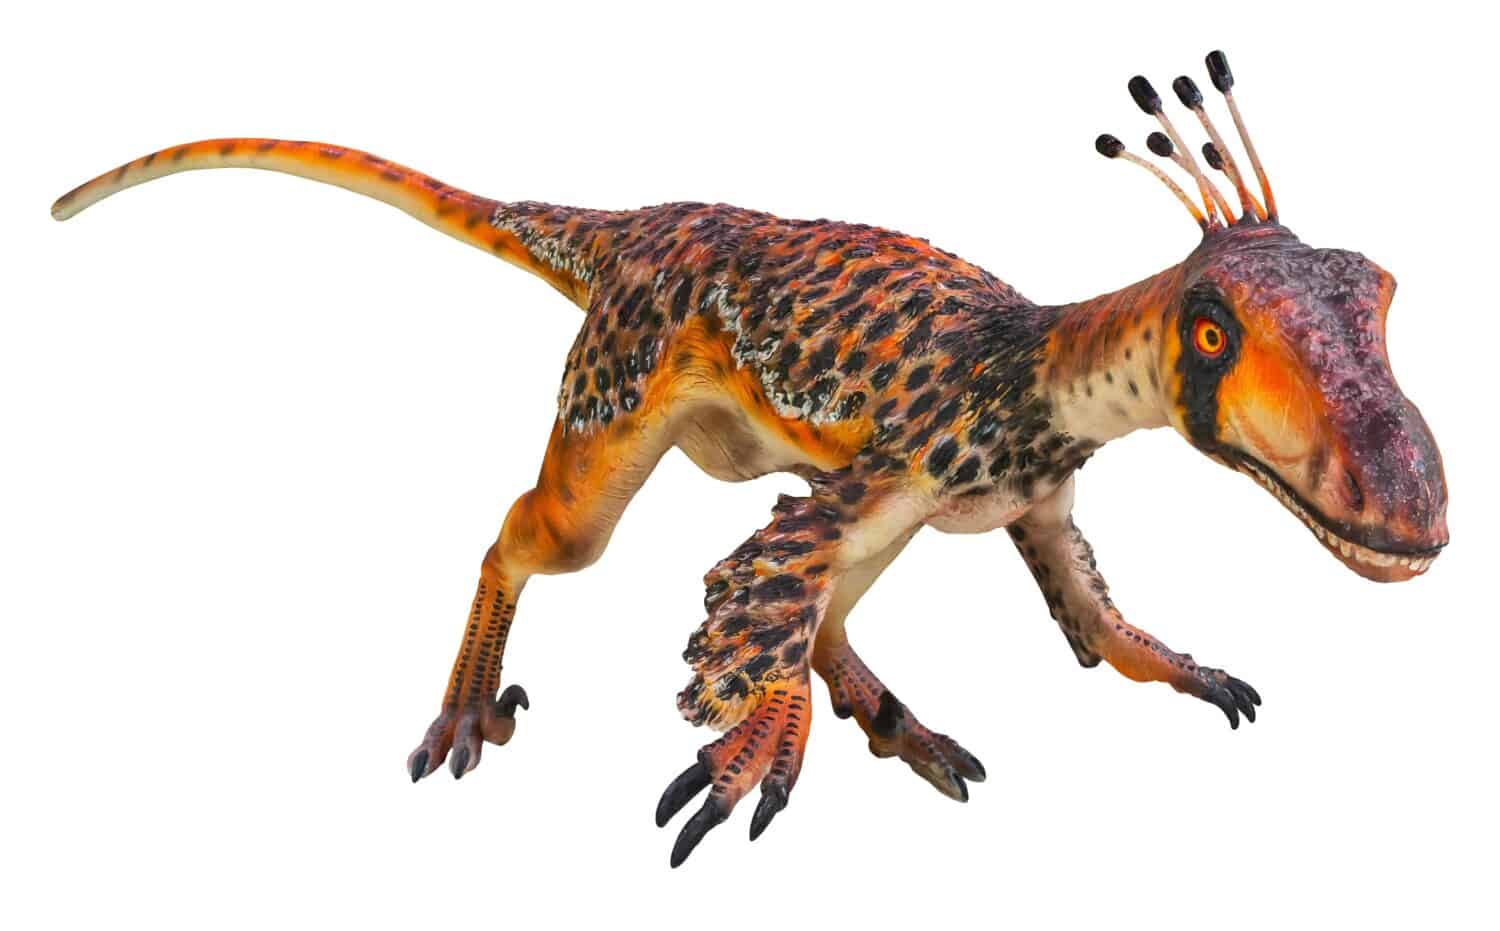 Graciliraptor is a carnivore genus of theropod dinosaurs from the early Cretaceous Period, It is a microraptorine dromaeosaurid, Graciliraptor isolated on white background with clipping path